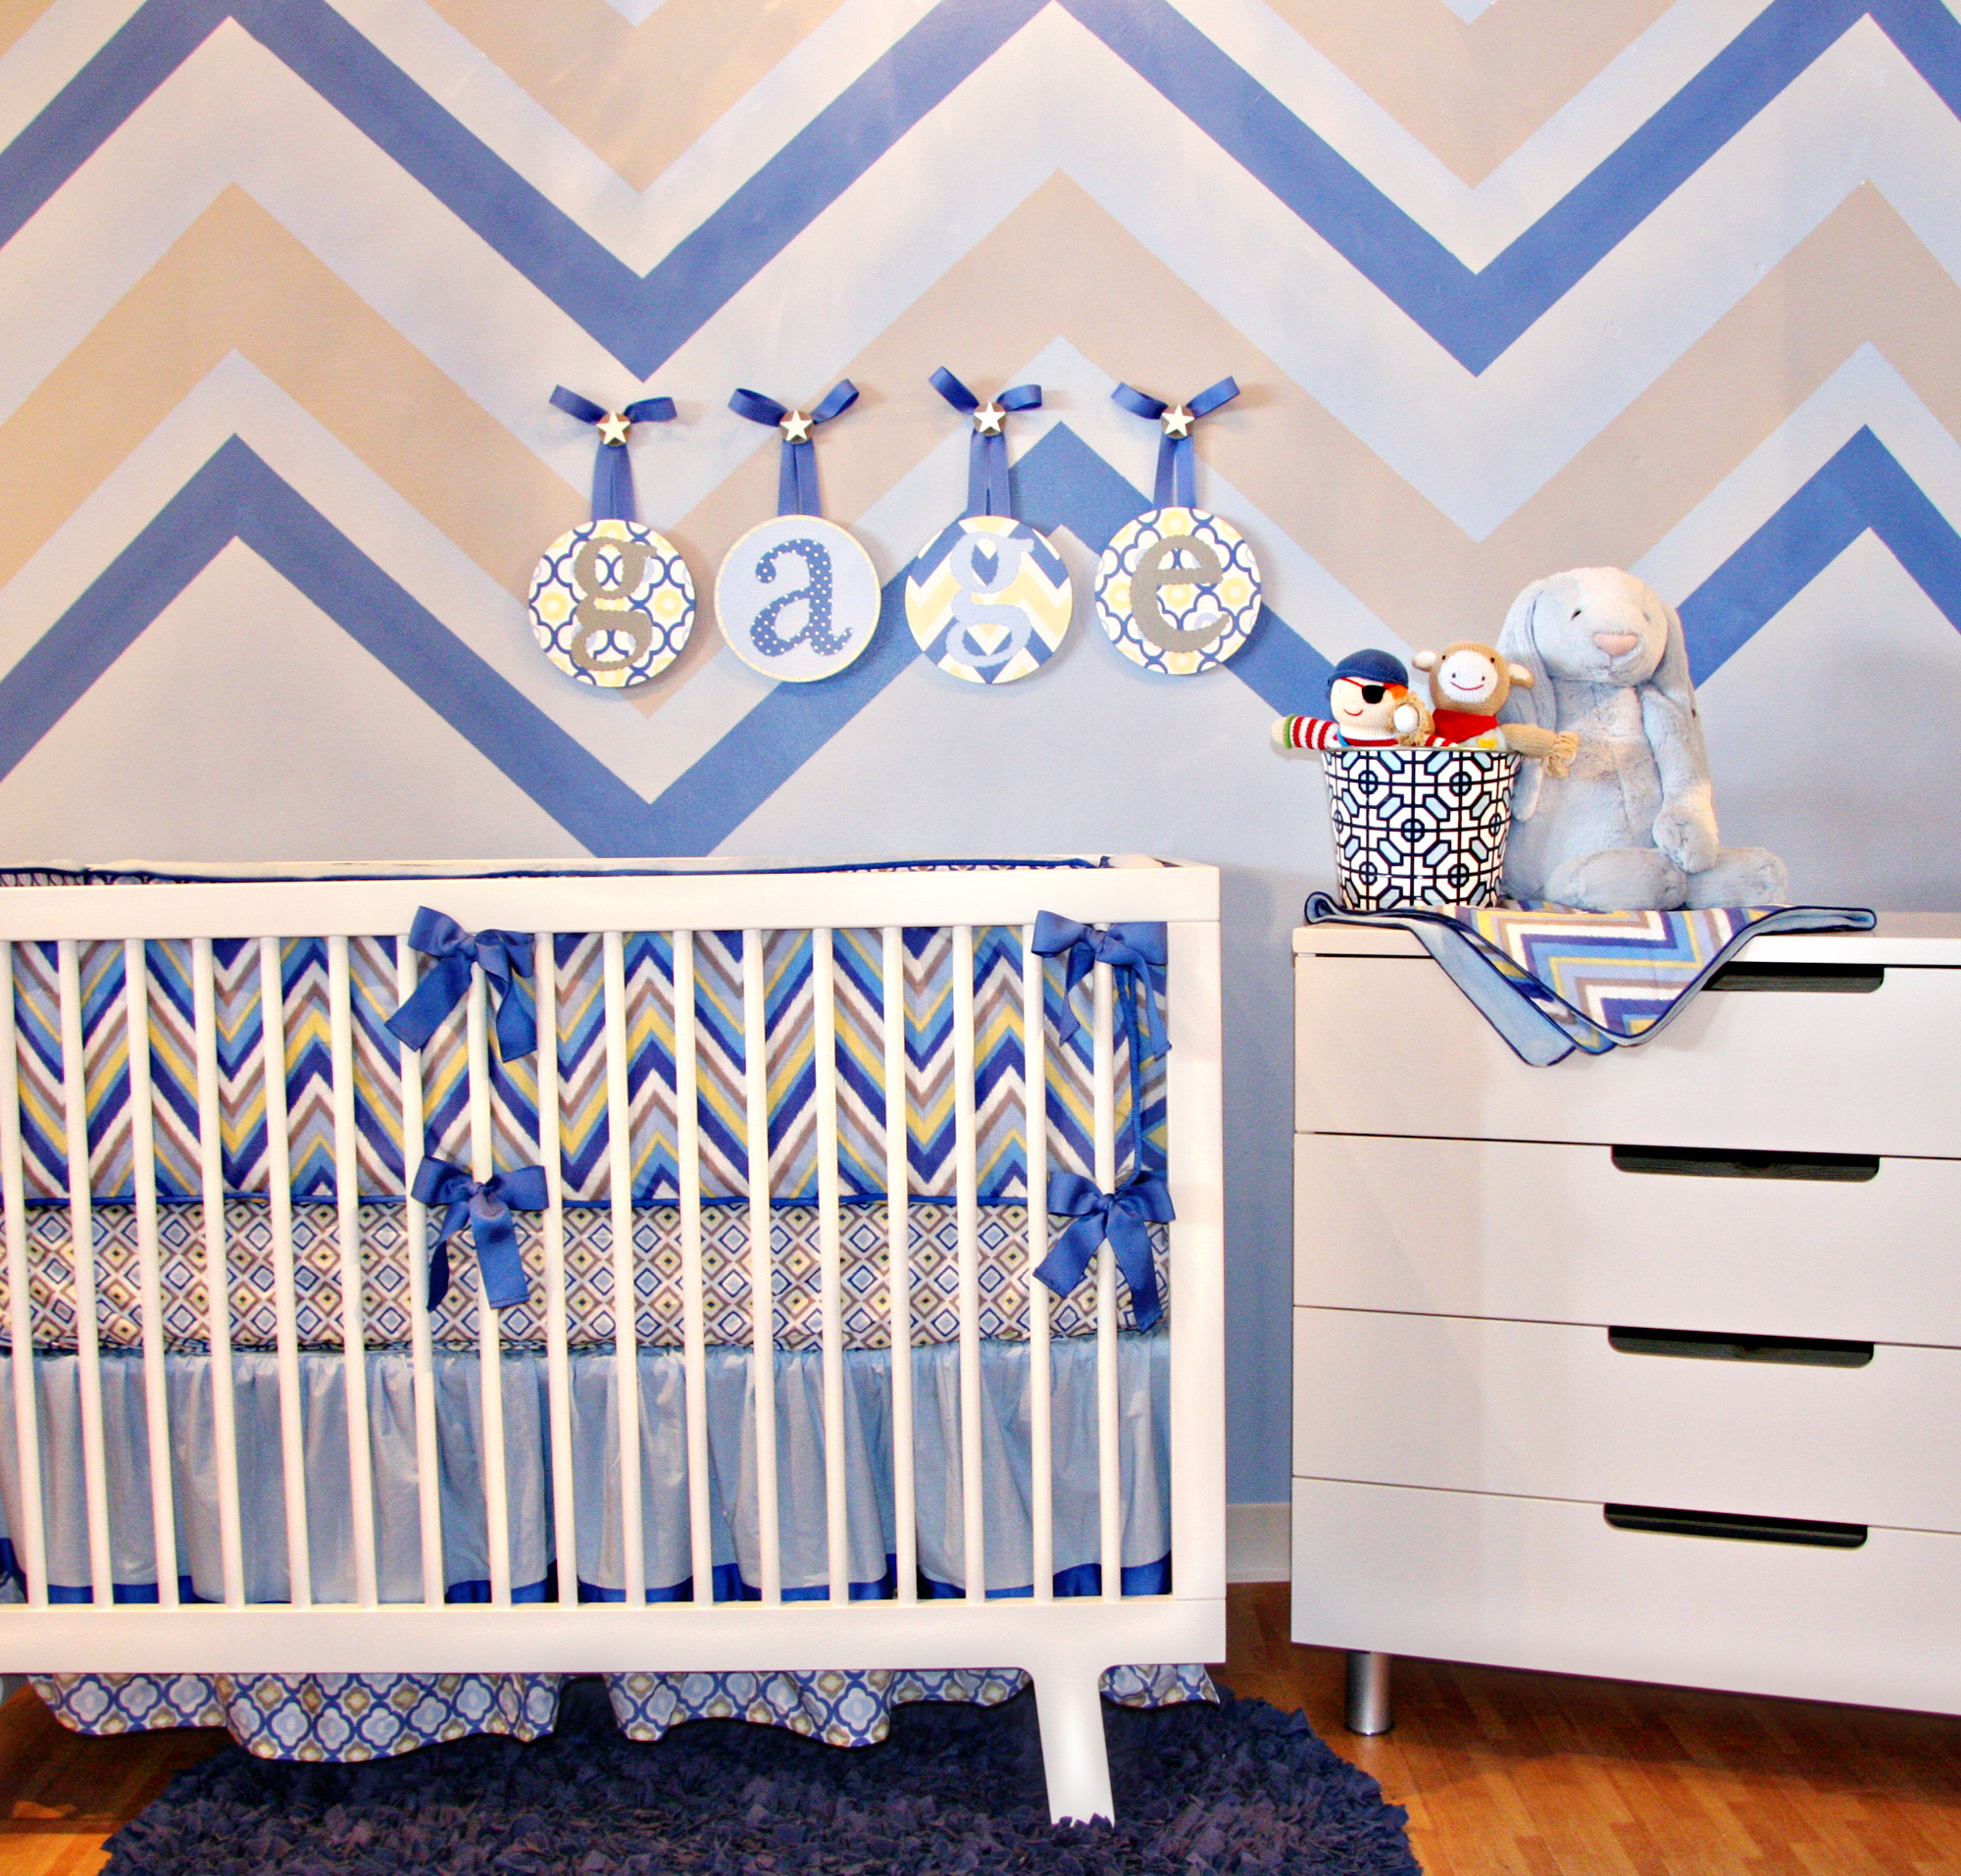 Zigzag Patterned Modern Fabulous Zigzag Patterned Linen Of Modern Crib Bedding And Wallpaper Attached As Focal Point In Baby Room Kids Room Inspirational Modern Crib Bedding With Lovely Color Combination